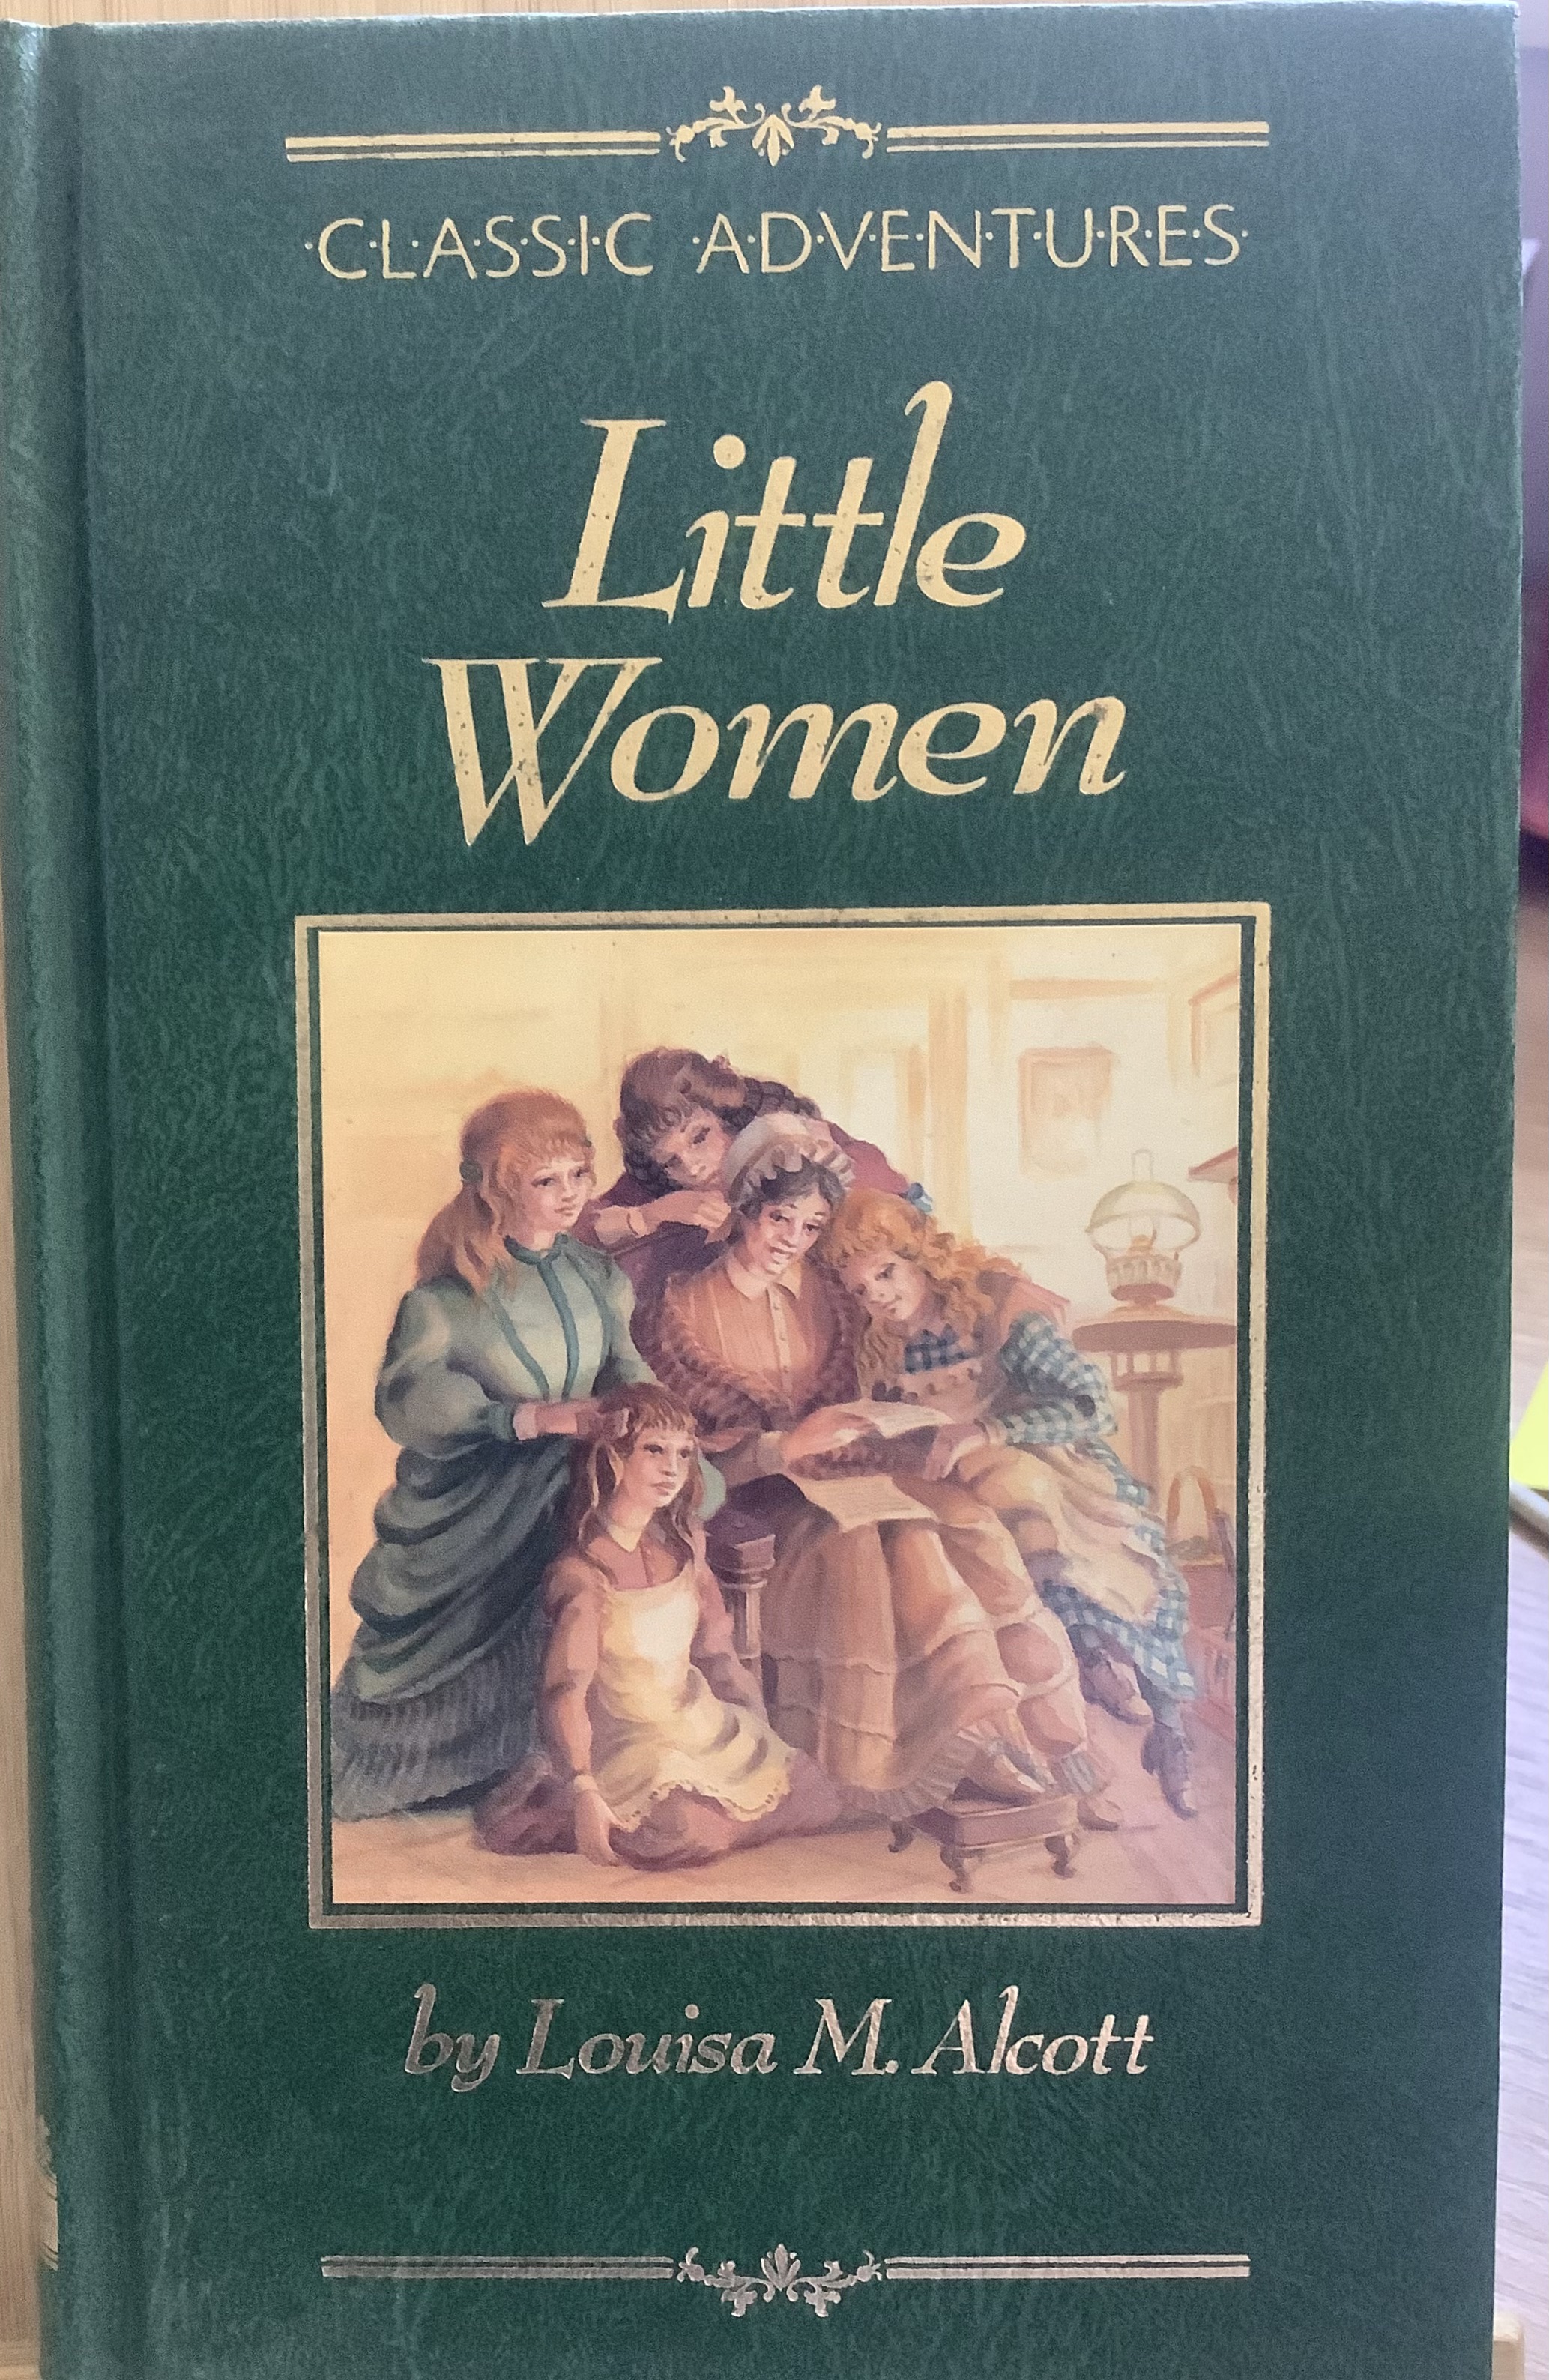 green hardcover novel. Little Women and author's name are in gold lettering. Illustration shows Marmee on a chair with all five girls surrounding her.